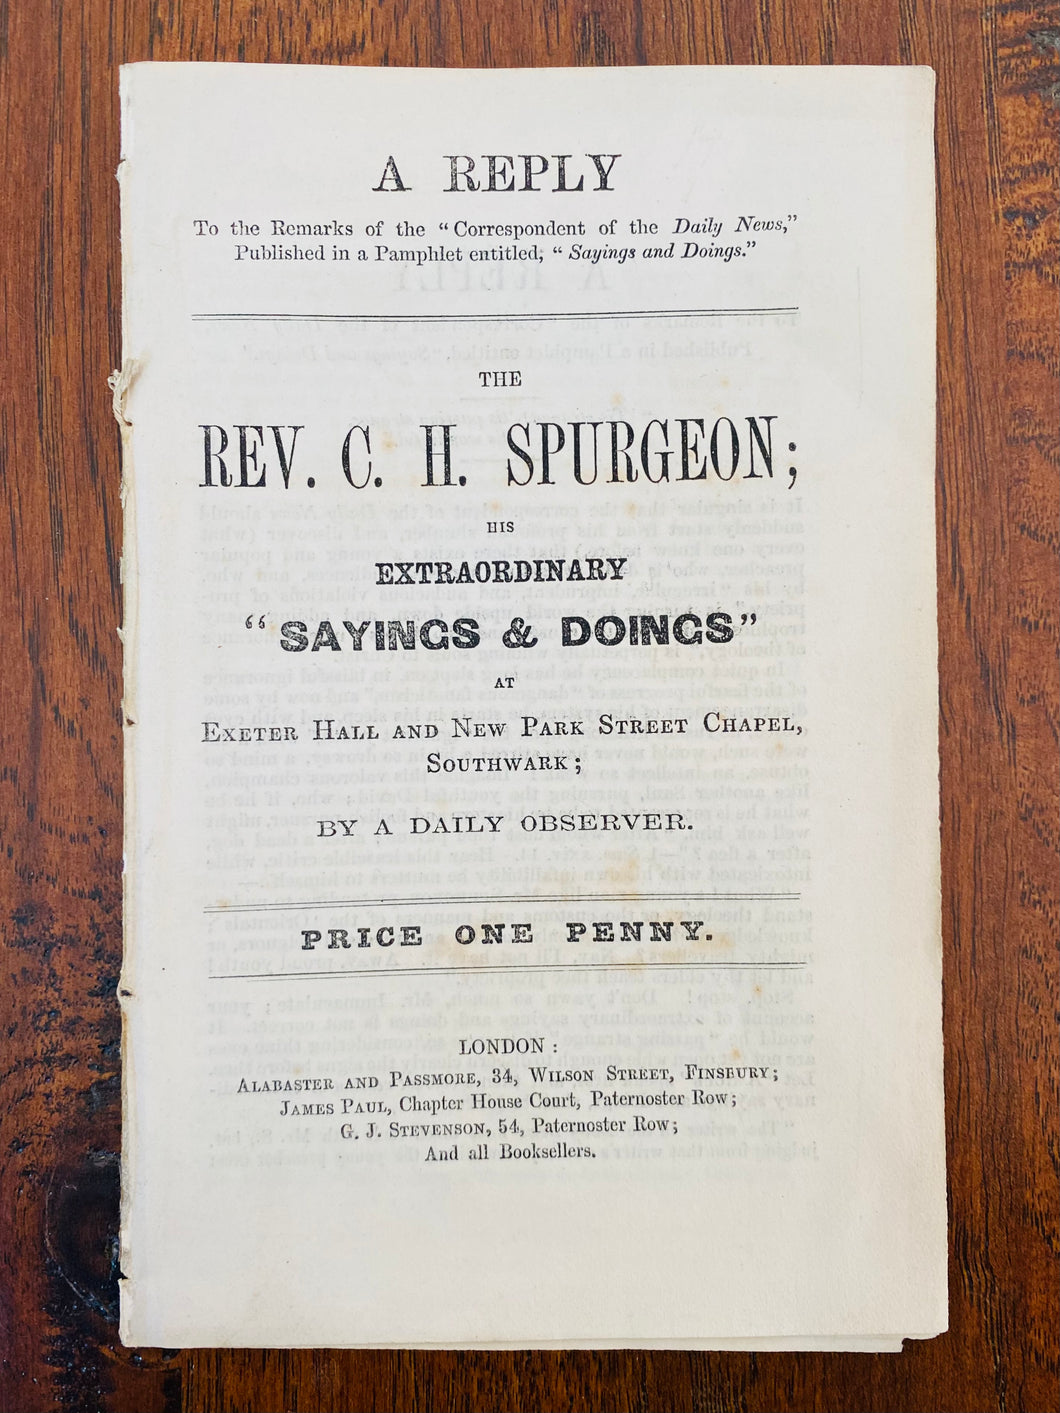 1856 C. H. SPURGEON. The Earliest Defense of C. H. Spurgeon Ever Published!